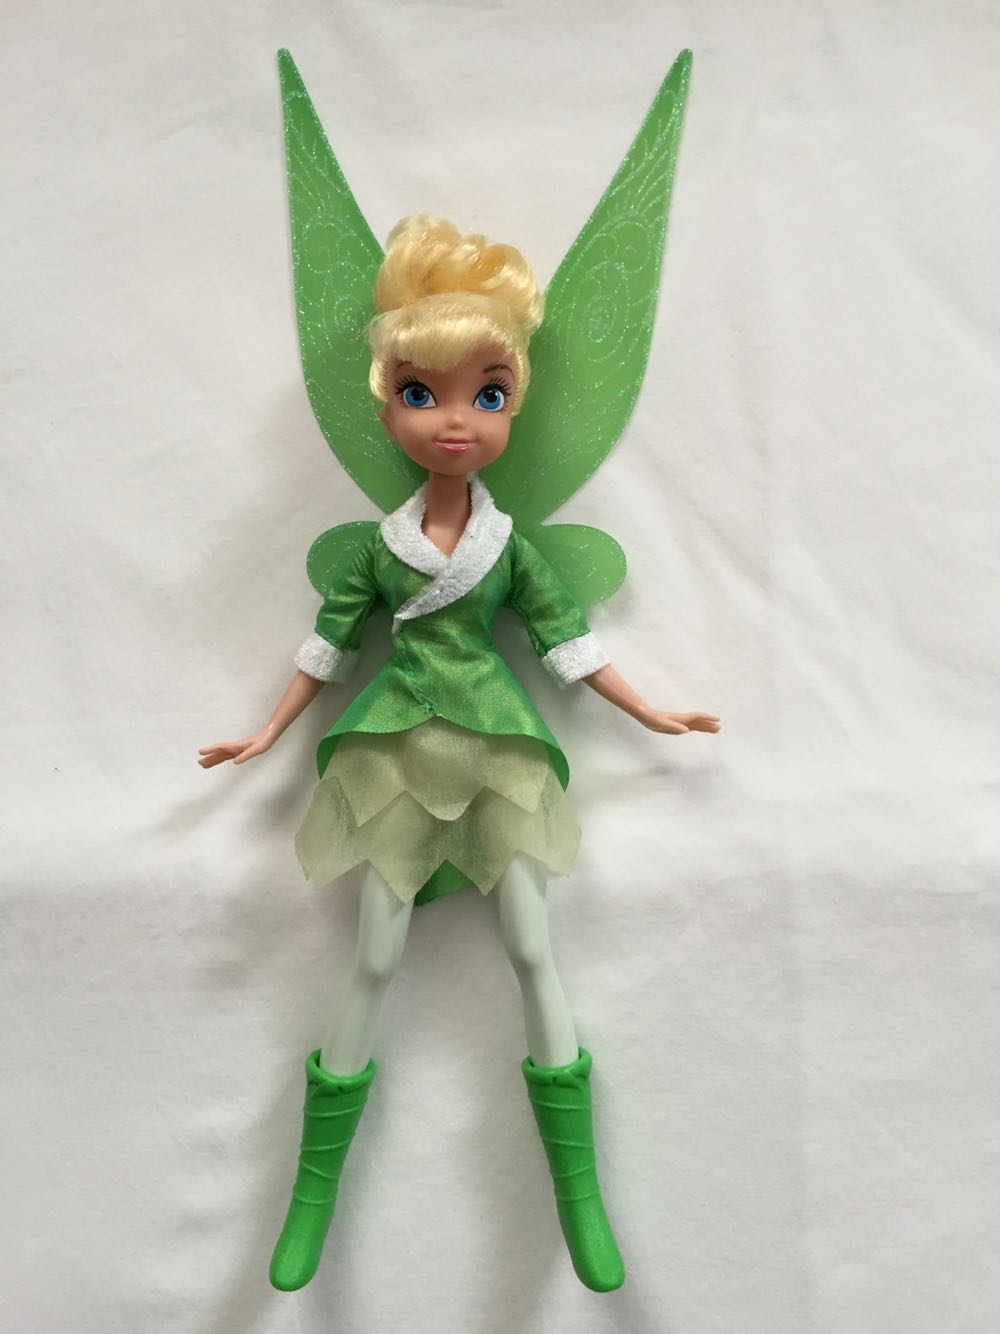 tinkerbell dolls for sale